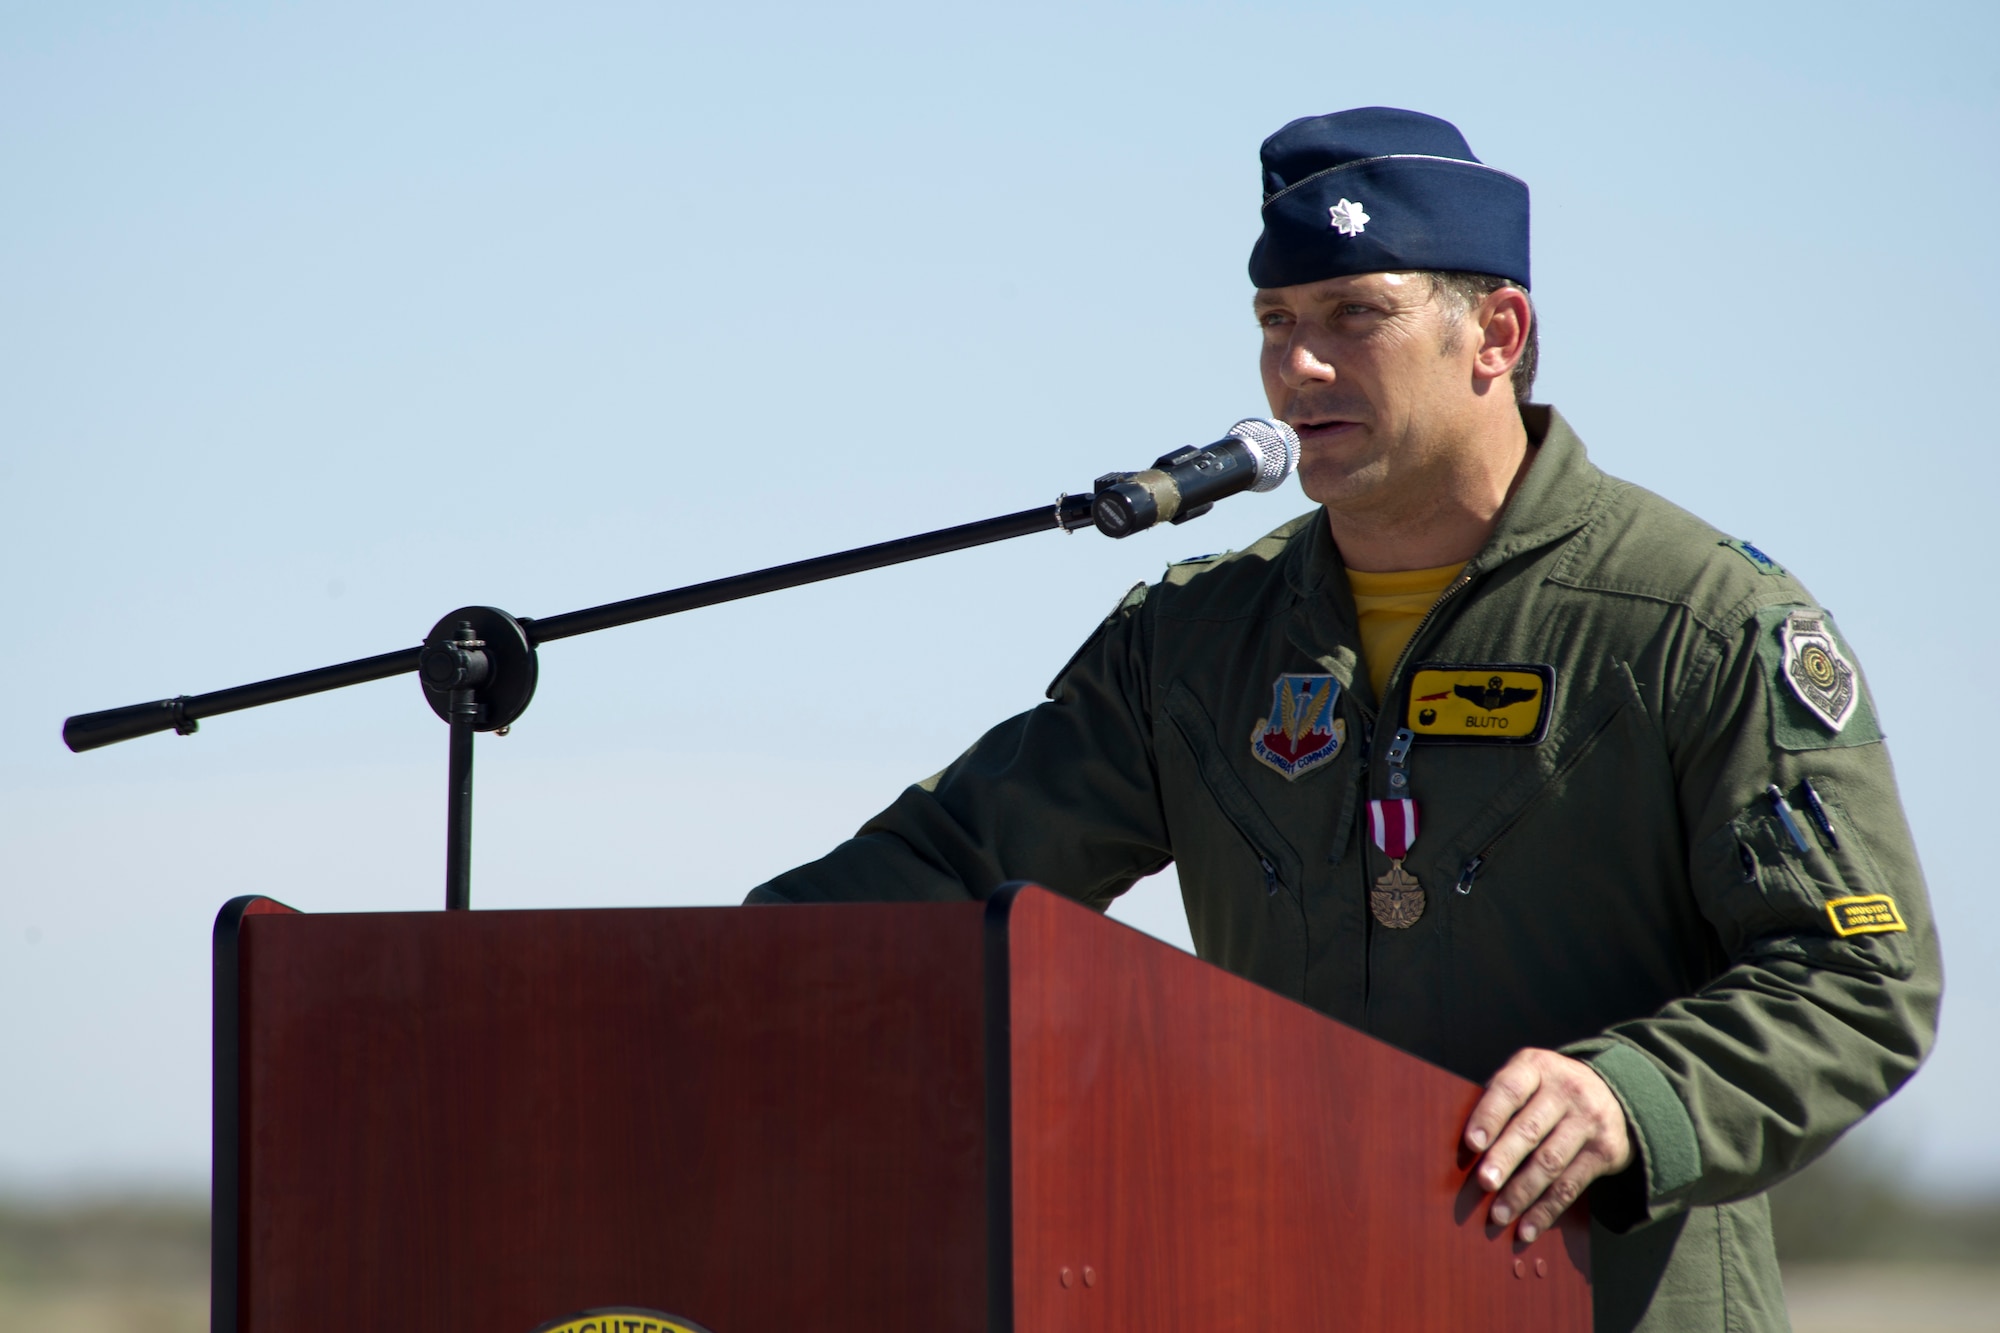 HOLLOMAN AIR FORCE BASE, N.M – Lt. Col. Craig Baker, 8th Fighter Squadron commander speaks about the squadron’s historic accomplishments and earned accolades, May  13, 2011, during the squadron’s inactivation ceremony. The 8th FS, known as the “Black Sheep,” was first activated in January 1941 and its mission and aircraft have transitioned several times to support the emerging needs of the Air Force. Starting with the P-40 Warhawk, the “Black Sheep” have led the way in fielding, flying and employing the Air Force’s newest air superiority aircraft. Currently flying the F-22 Raptor, the unit’s inactivation means that its Airman and aircraft will be relocated to other units on Holloman. The famed “Black Sheep”” patch, name, and colors will be maintained by Air Force historians for reactivation when needed. (U.S. Air Force photo by Tech Sgt. Joe Laws / Released)